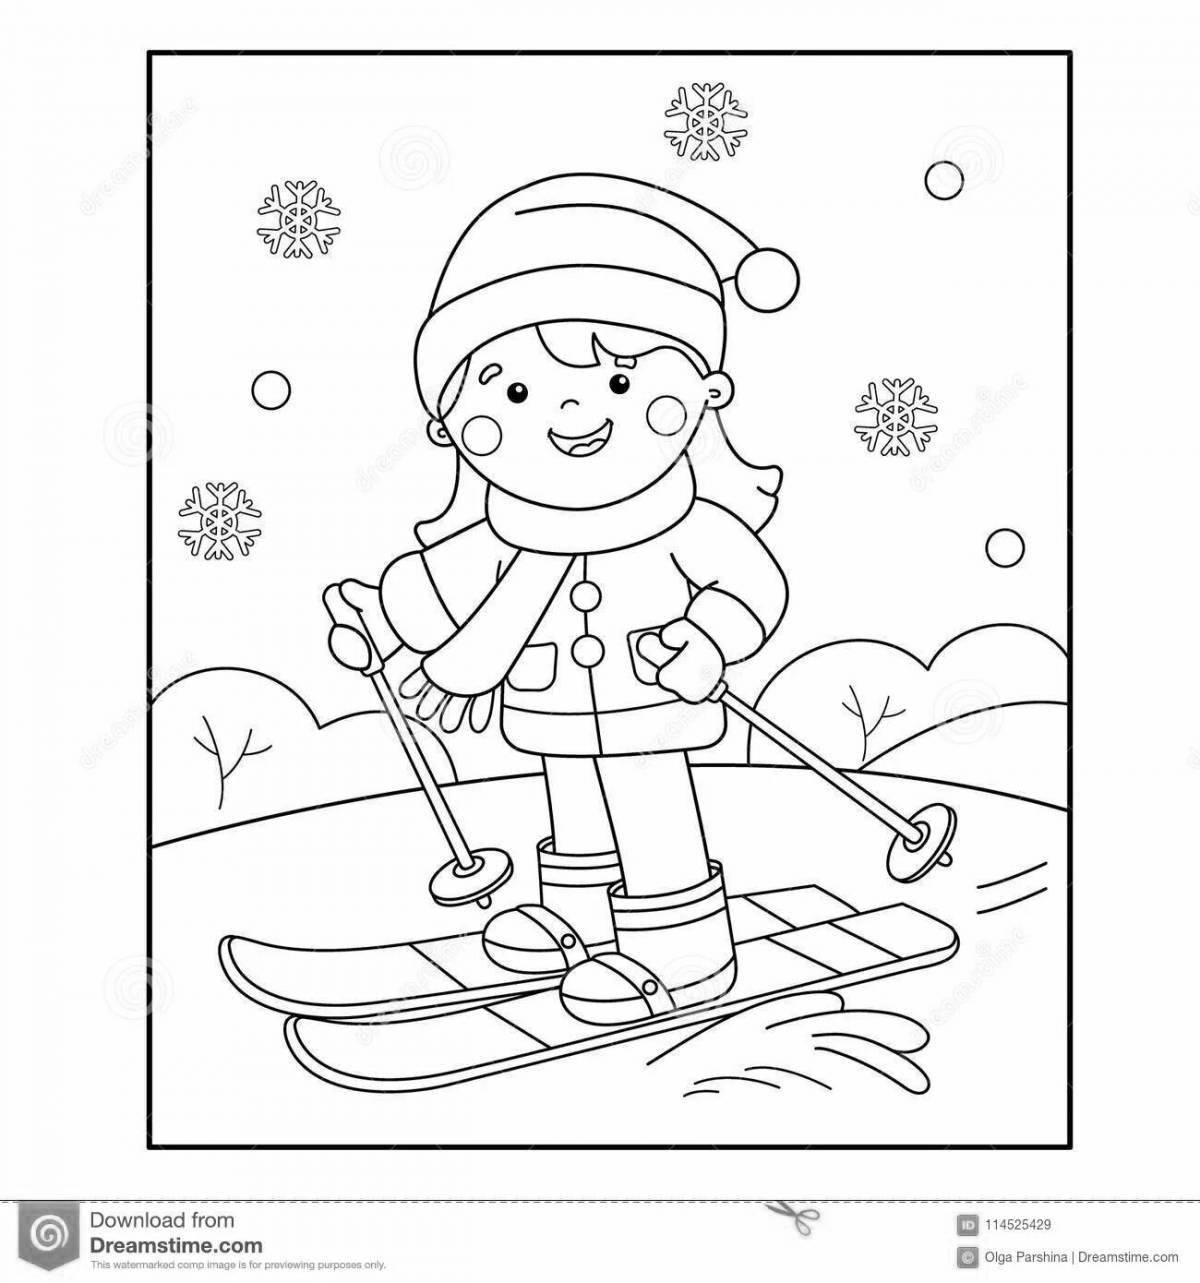 Winter sports coloring book for preschoolers